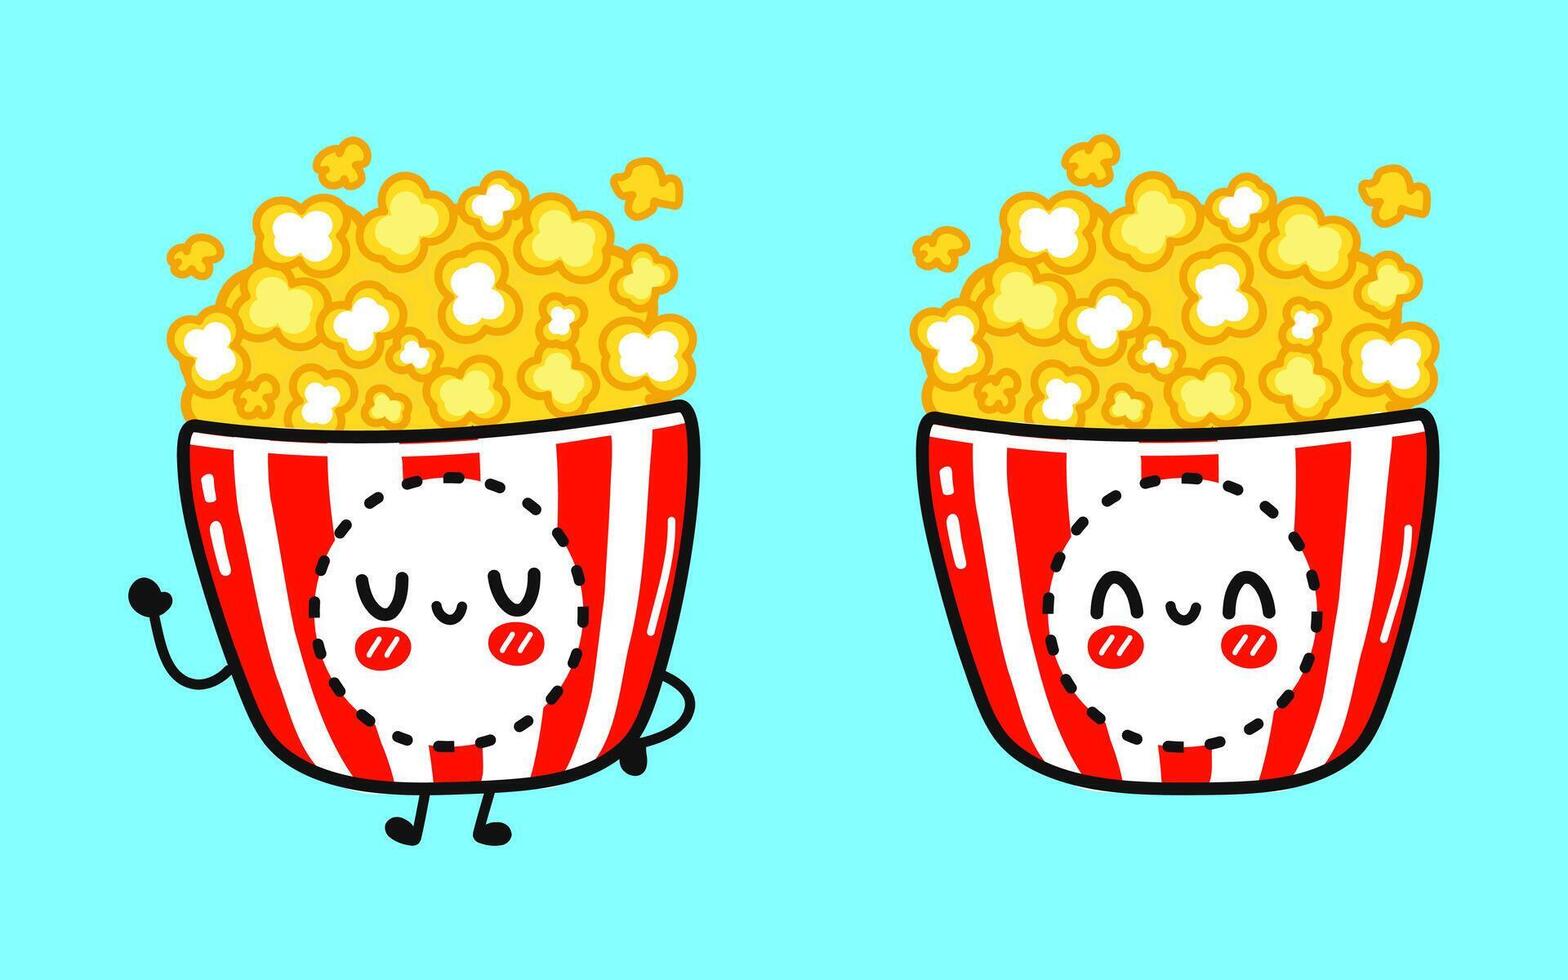 Popcorn character. hand drawn cartoon kawaii character illustration icon. Isolated on blue background. Popcorn character concept vector